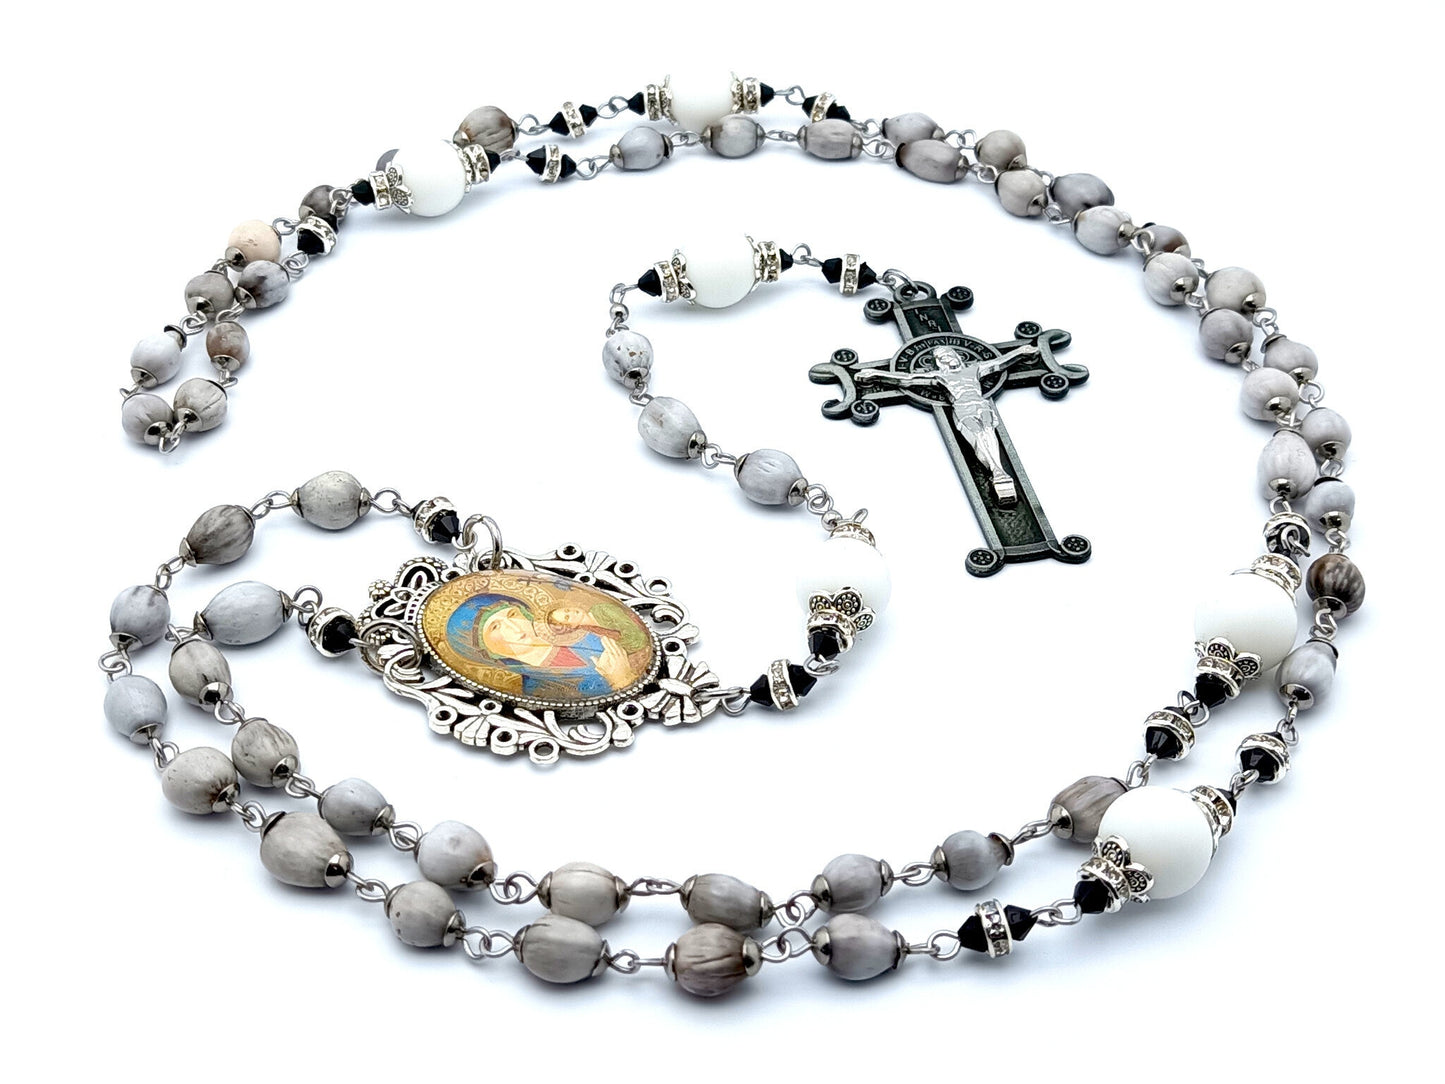 Our Lady of Perpetual Help unique rosary beads with Jobs Tears and alabaster gemstone beads and pewter style Saint Benedict crucifix.